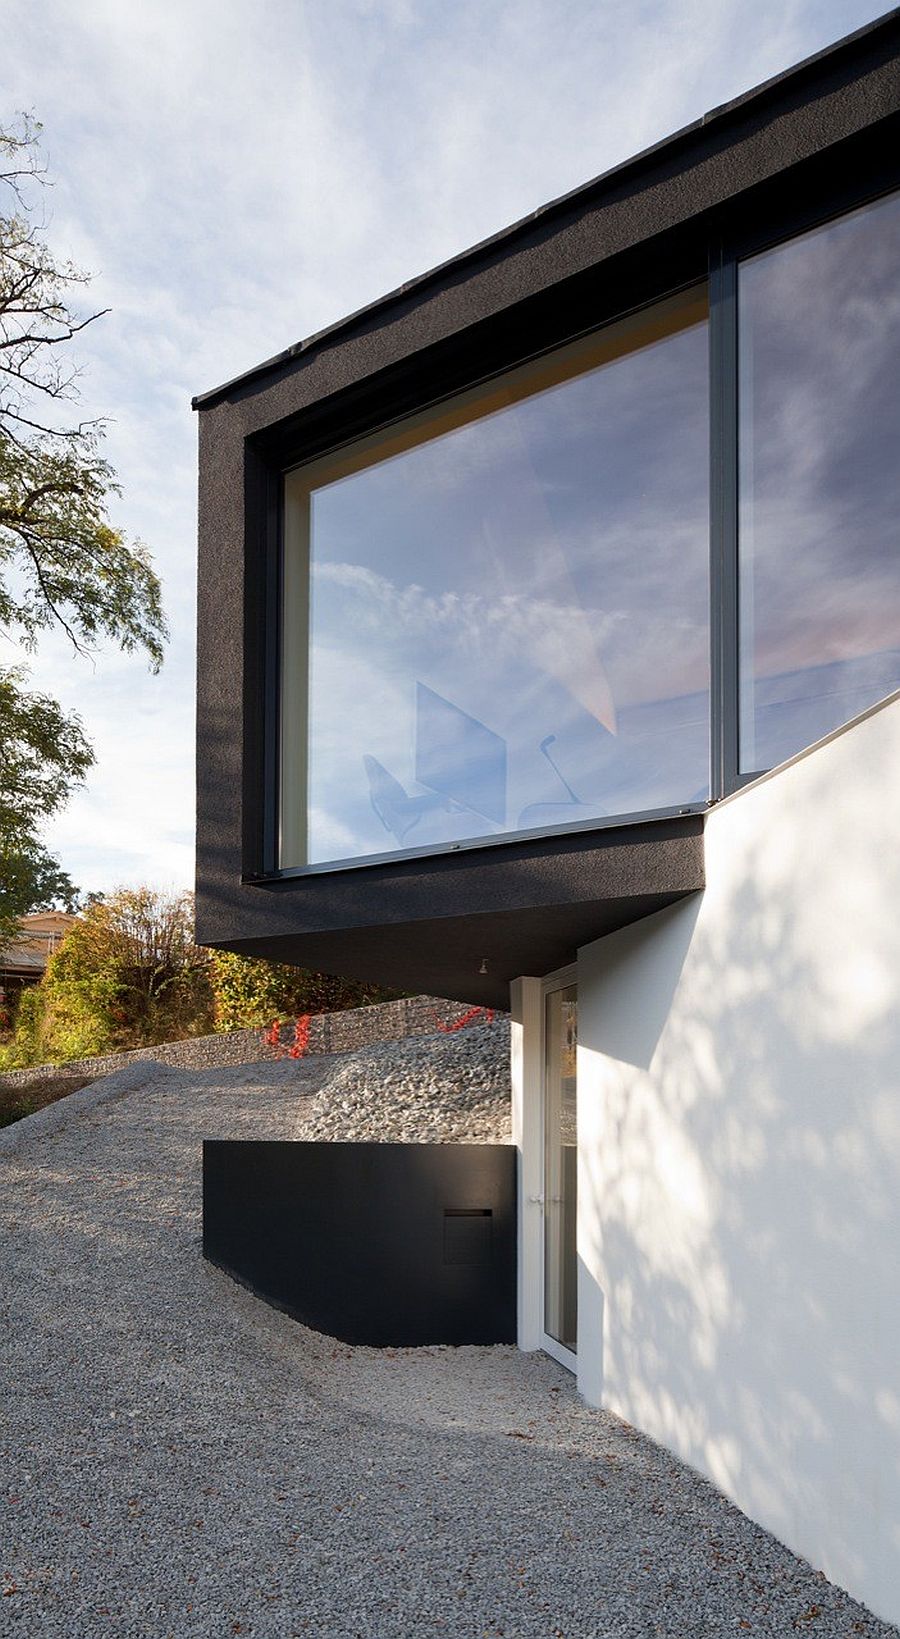 Entrance leading to the contemporary minimal German home